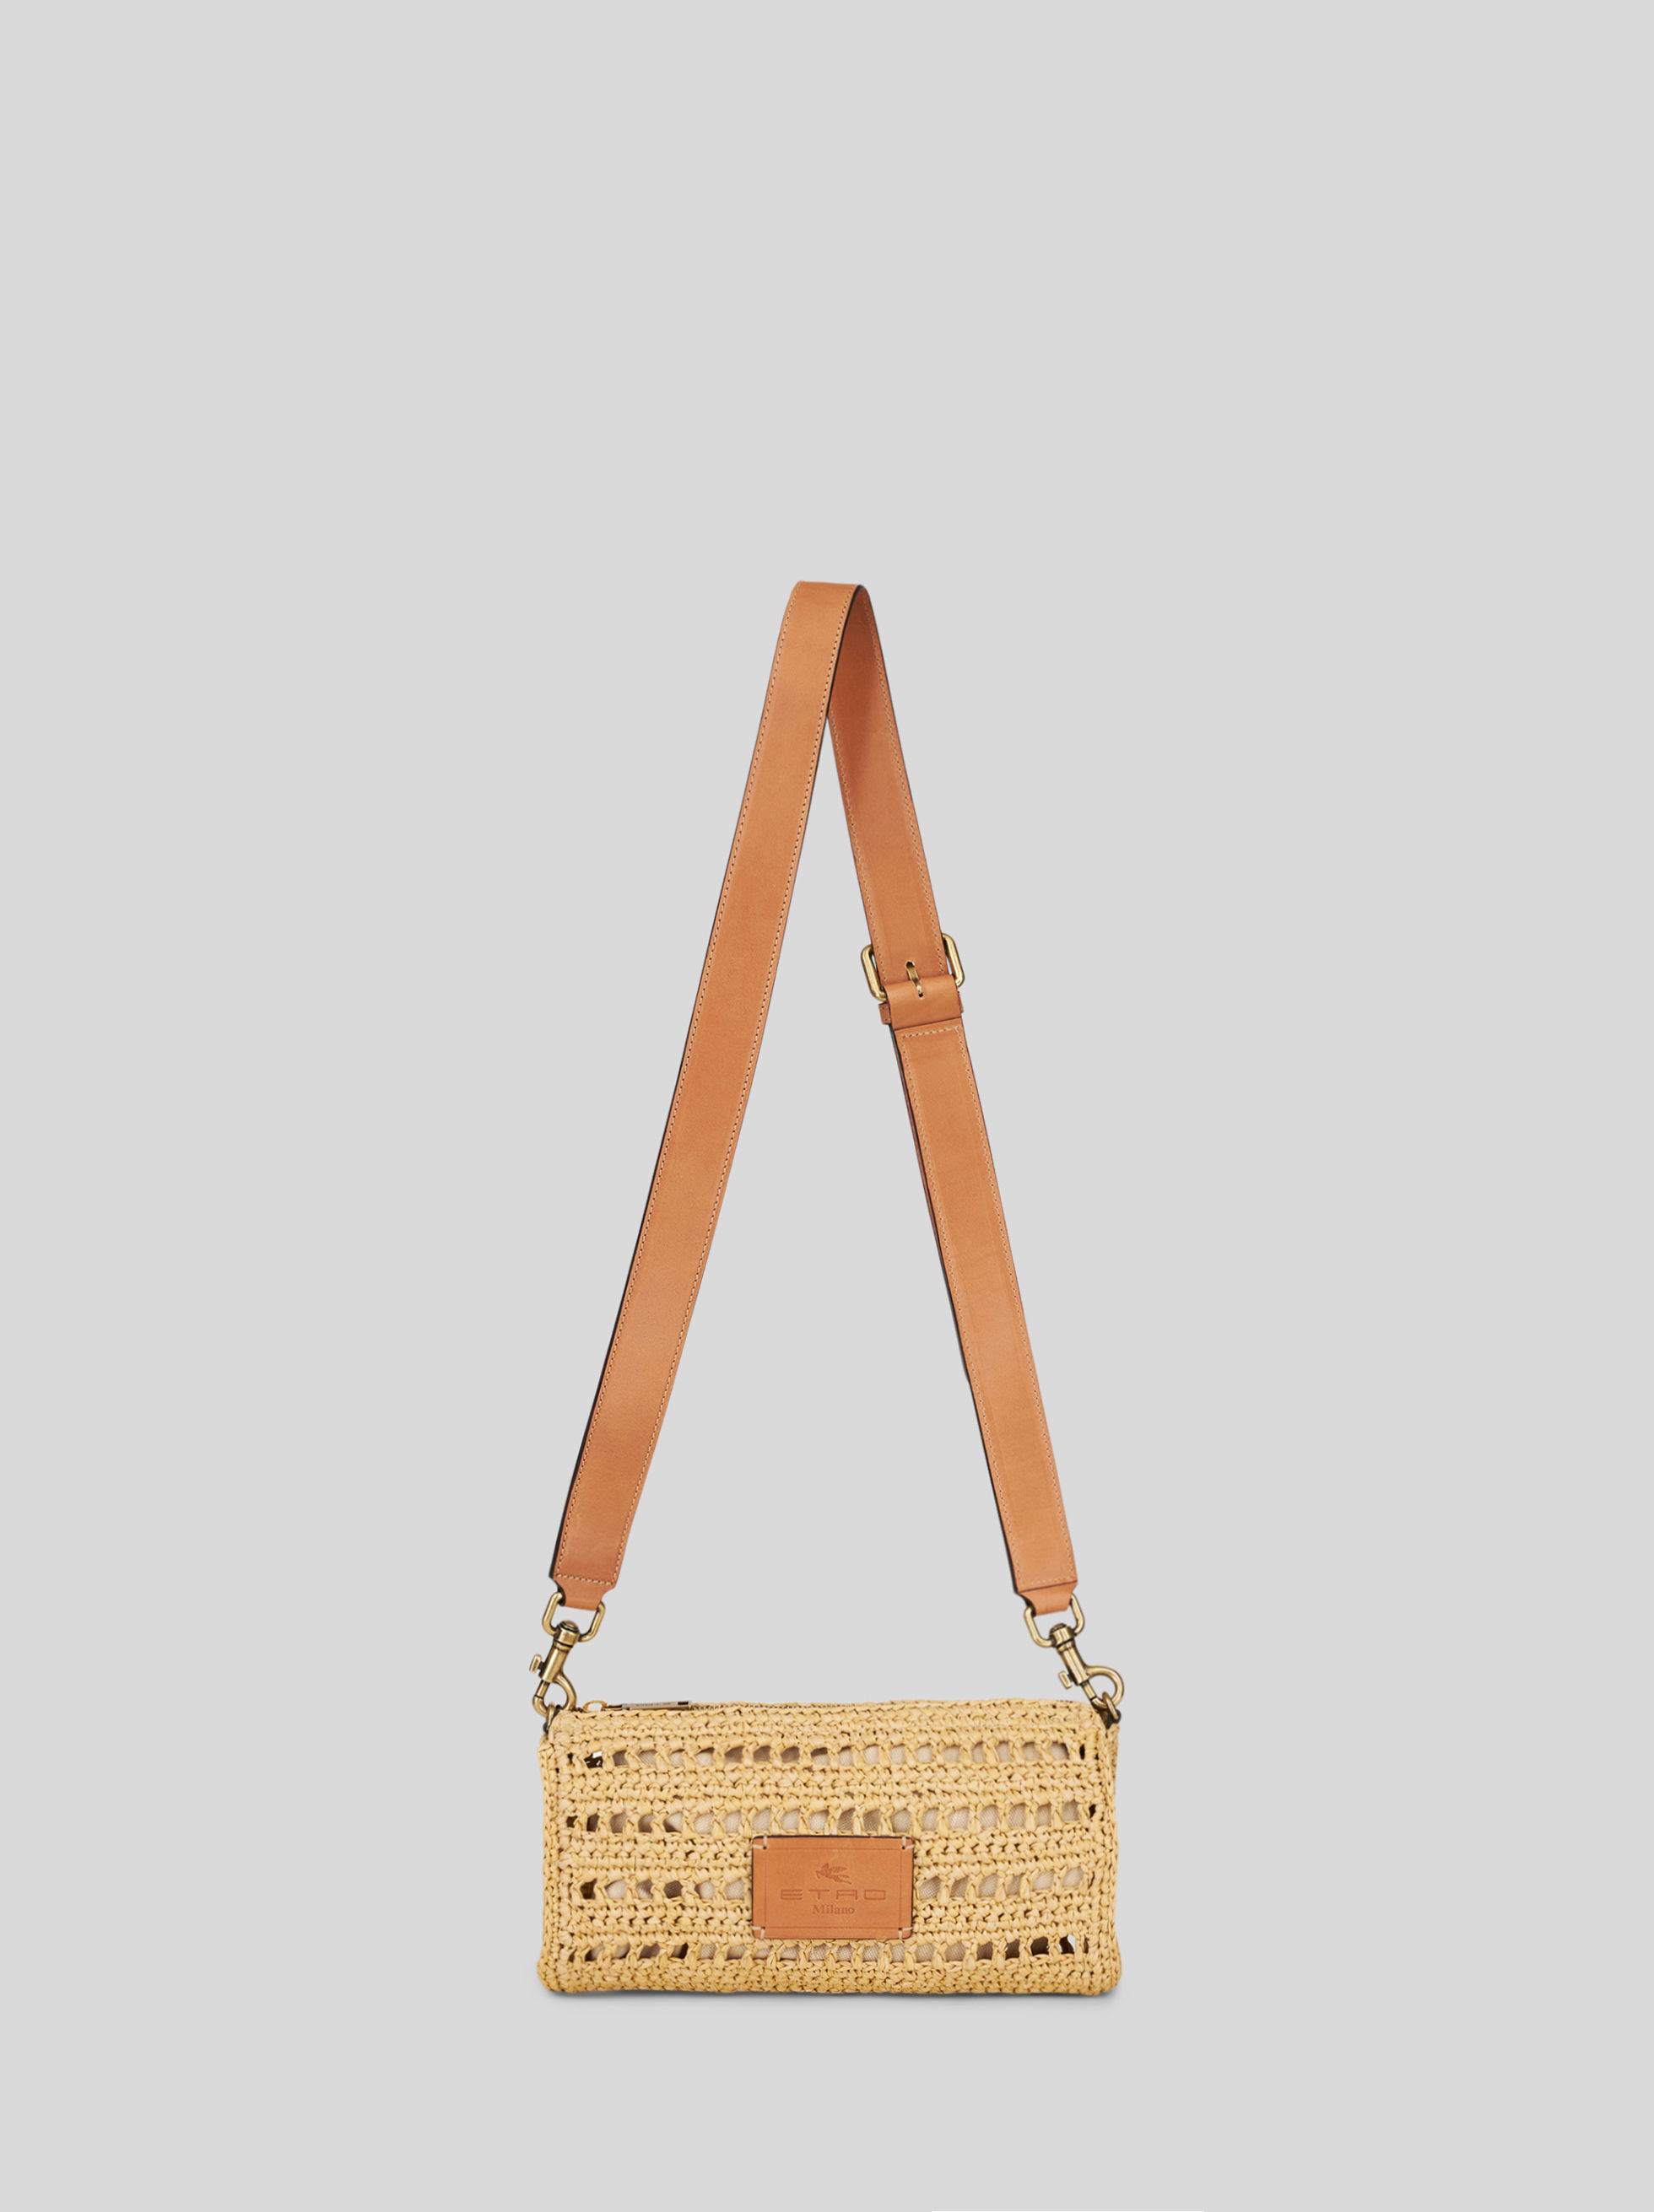 SMALL SHOULDER BAG IN PERFORATED RAFFIA